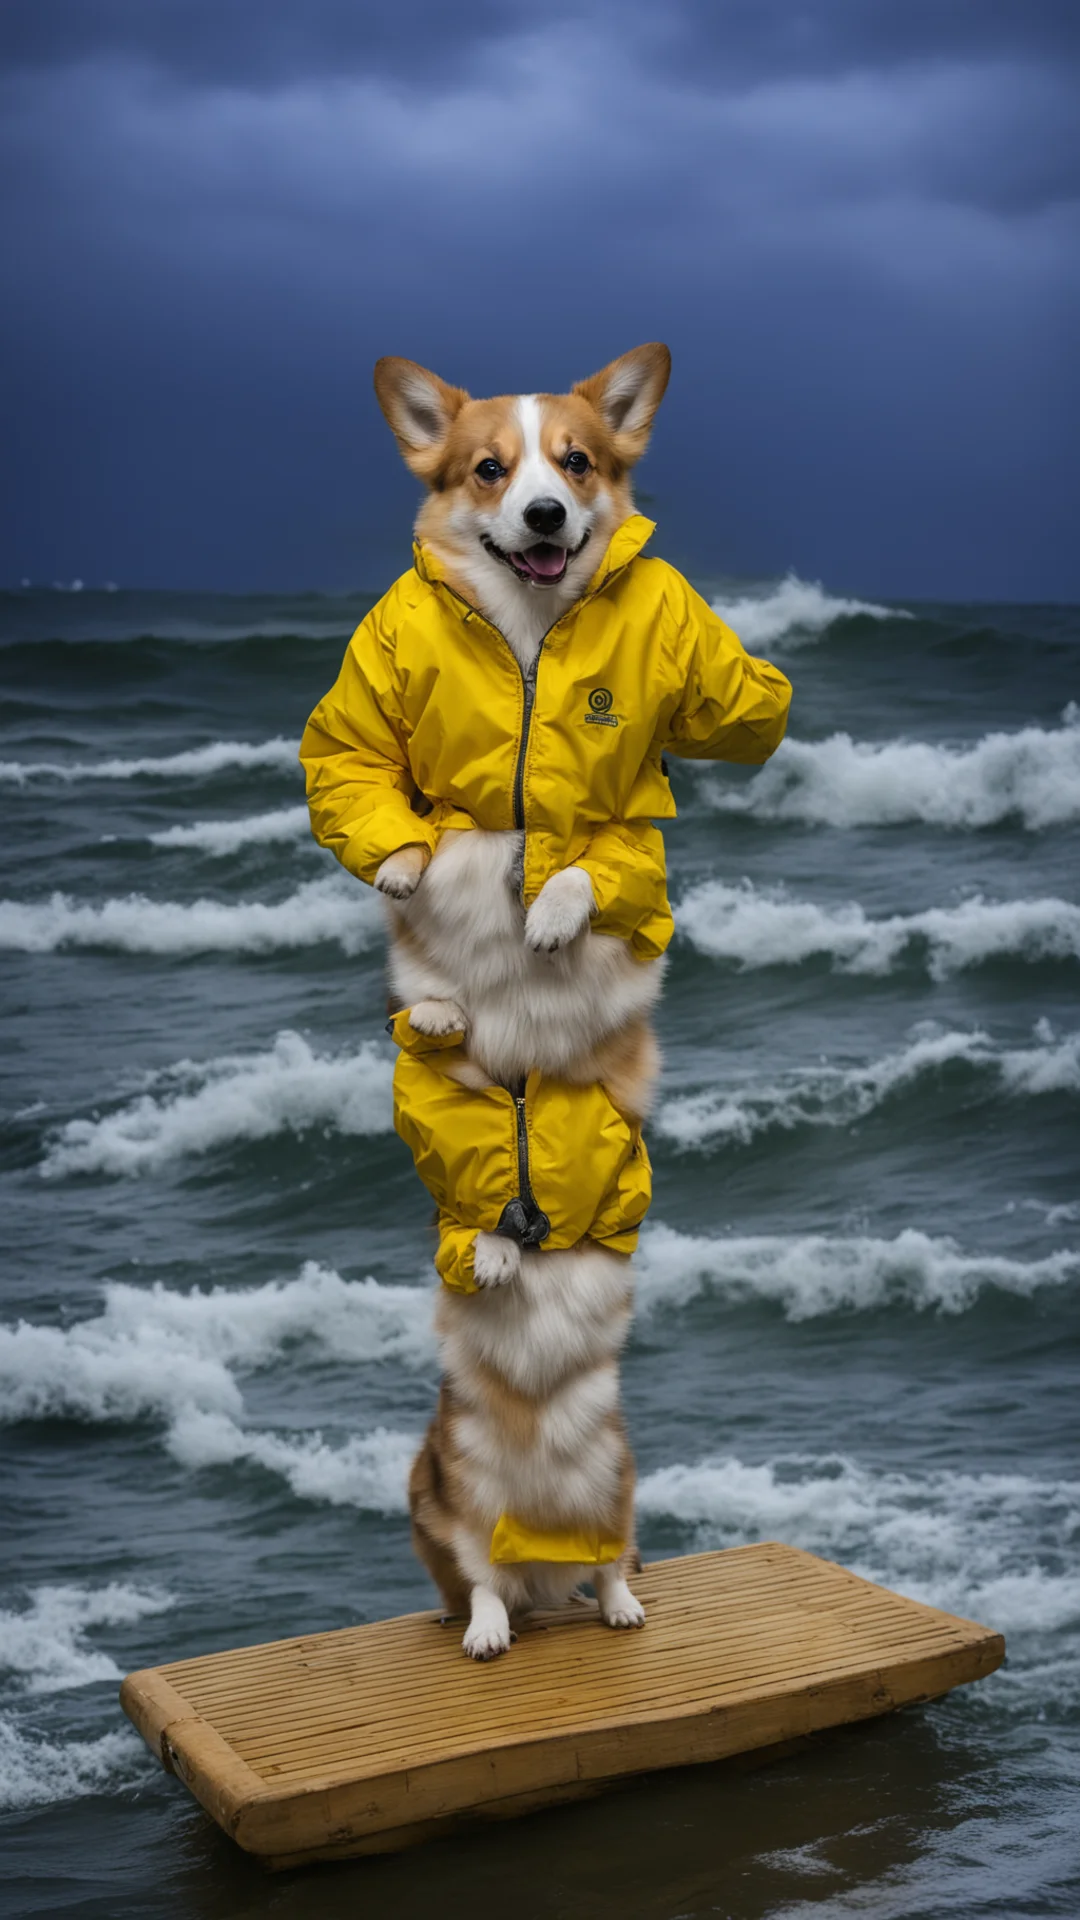 aia corgi in a yellow jacket on a bamboo raft in the middle of a tormented ocean during night thunder tall